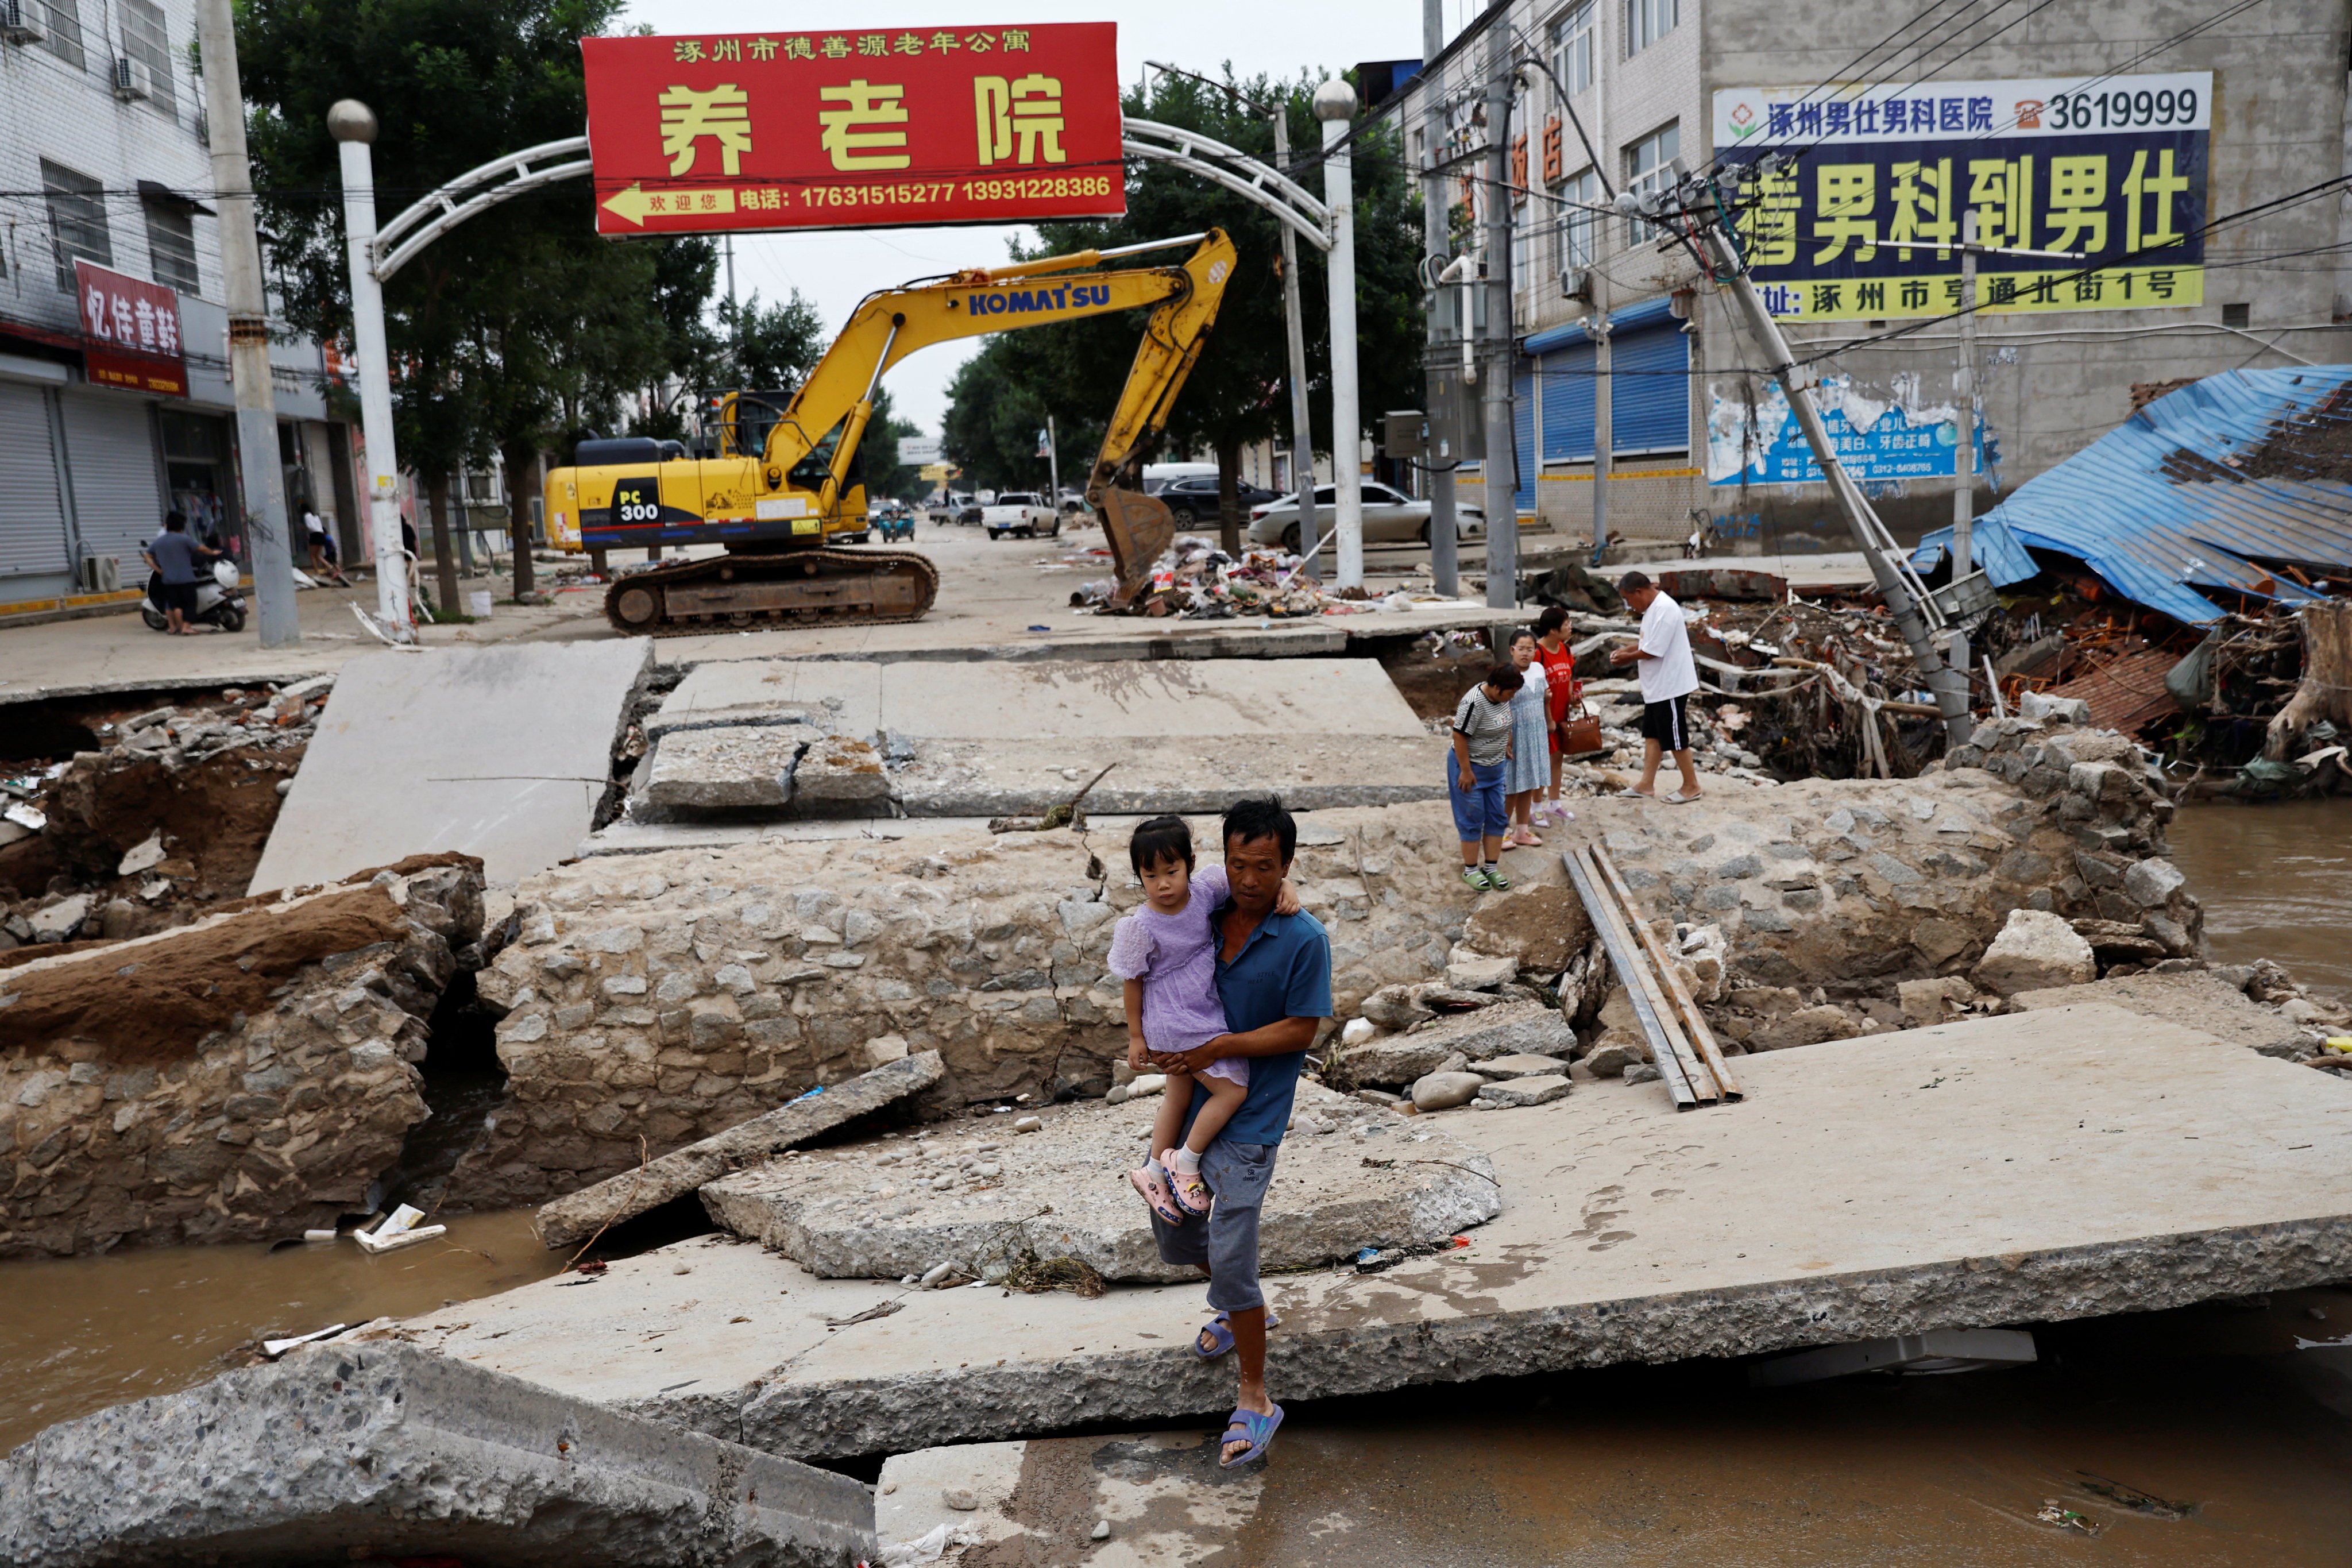 A man holding a child walks across a damaged bridge after rains and floods brought by remnants of Typhoon Doksuri, in Zhuozhou, Hebei province, China on August 7, 2023. Photo: Reuters